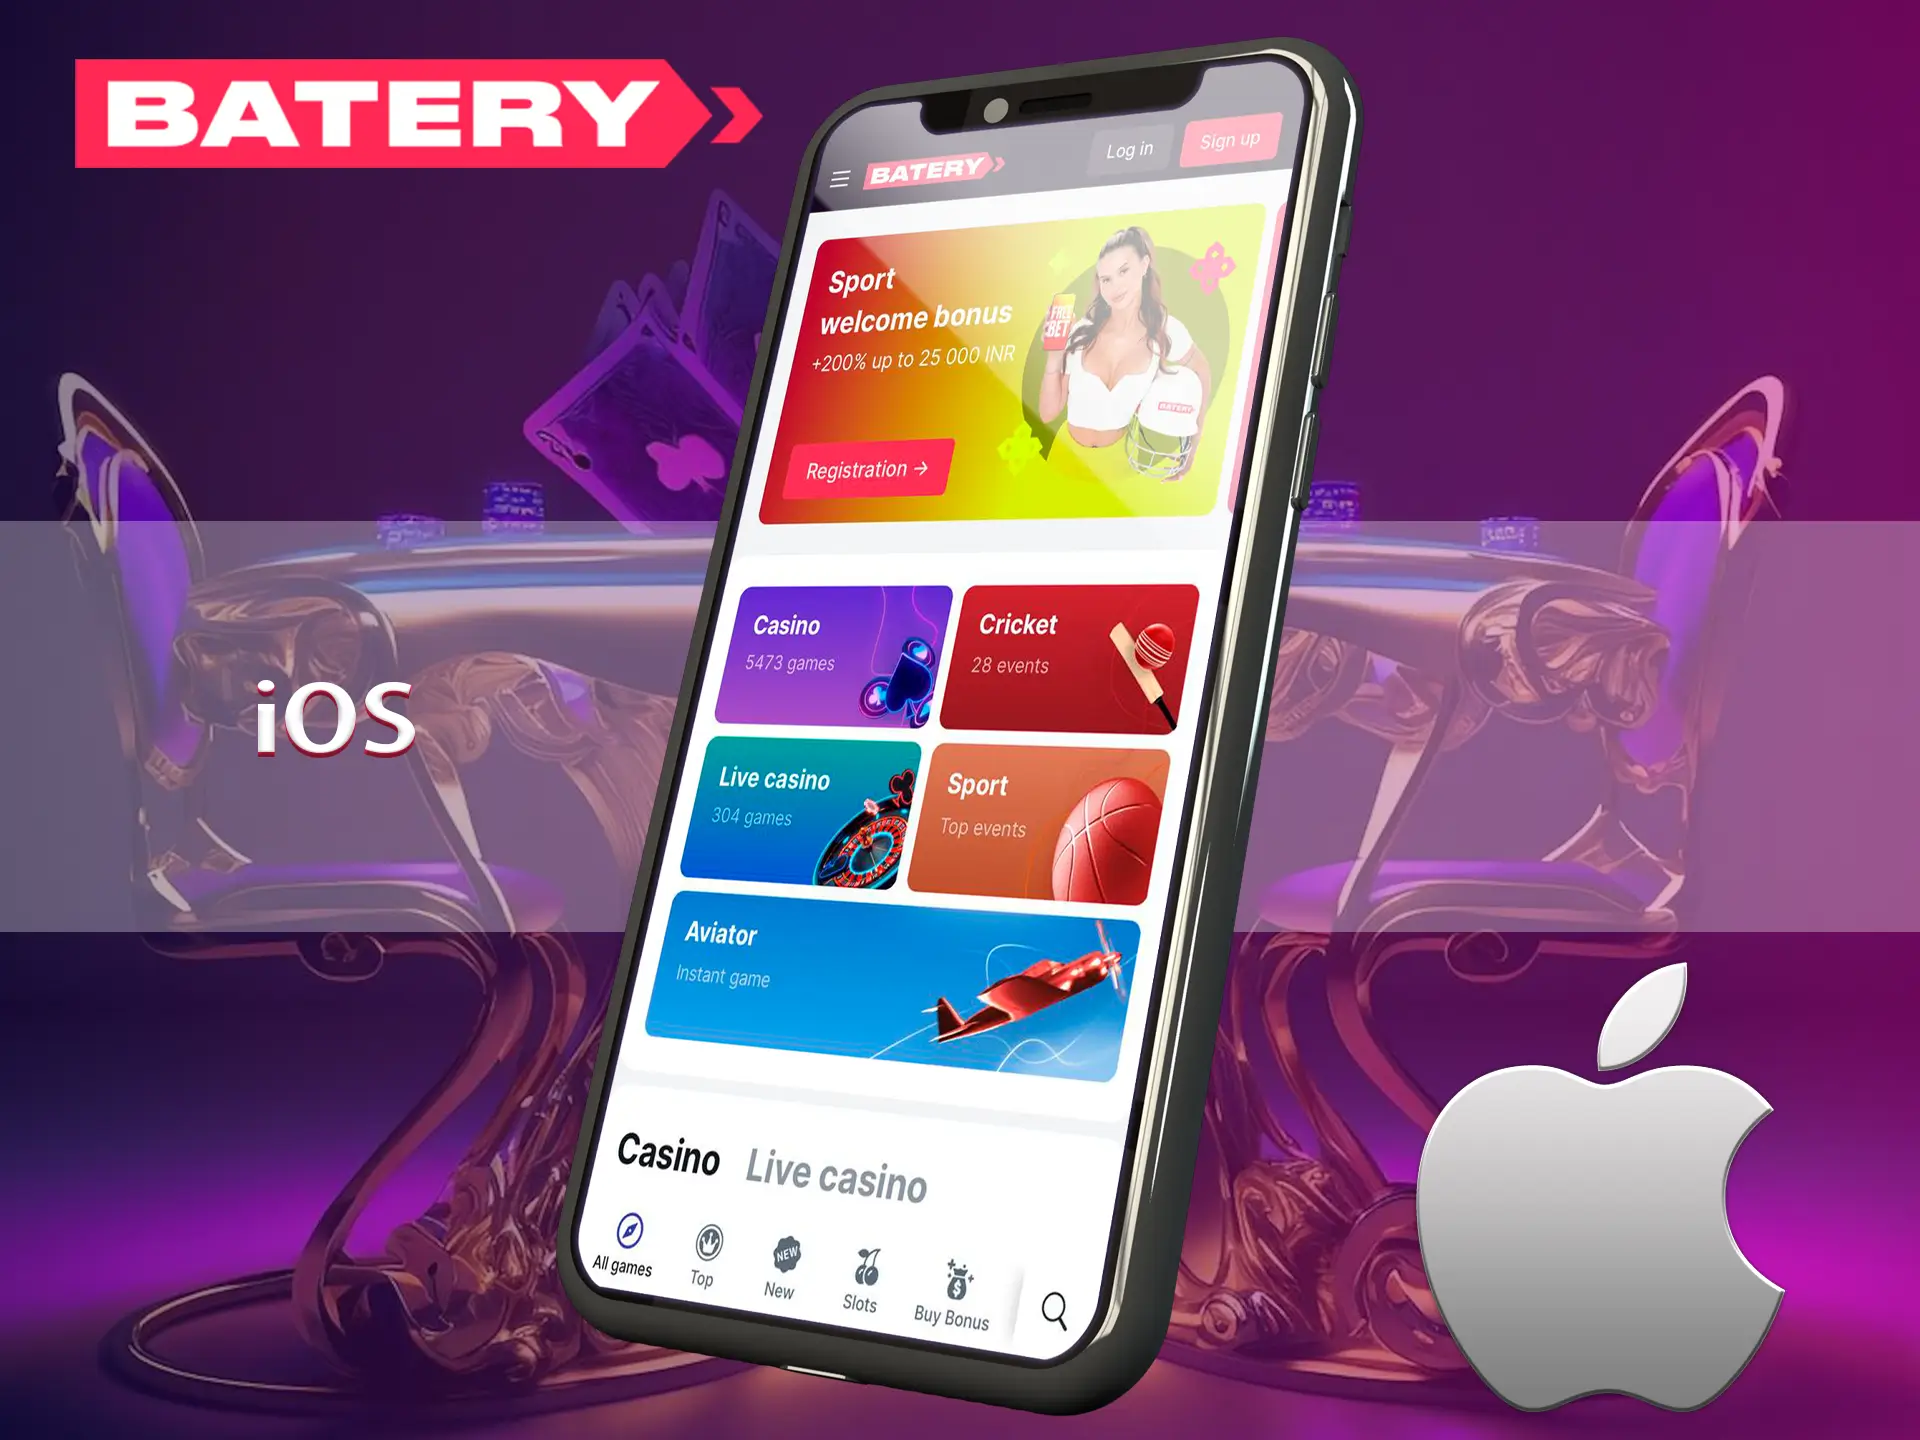 The Batery app is smooth and responsive on ios devices.